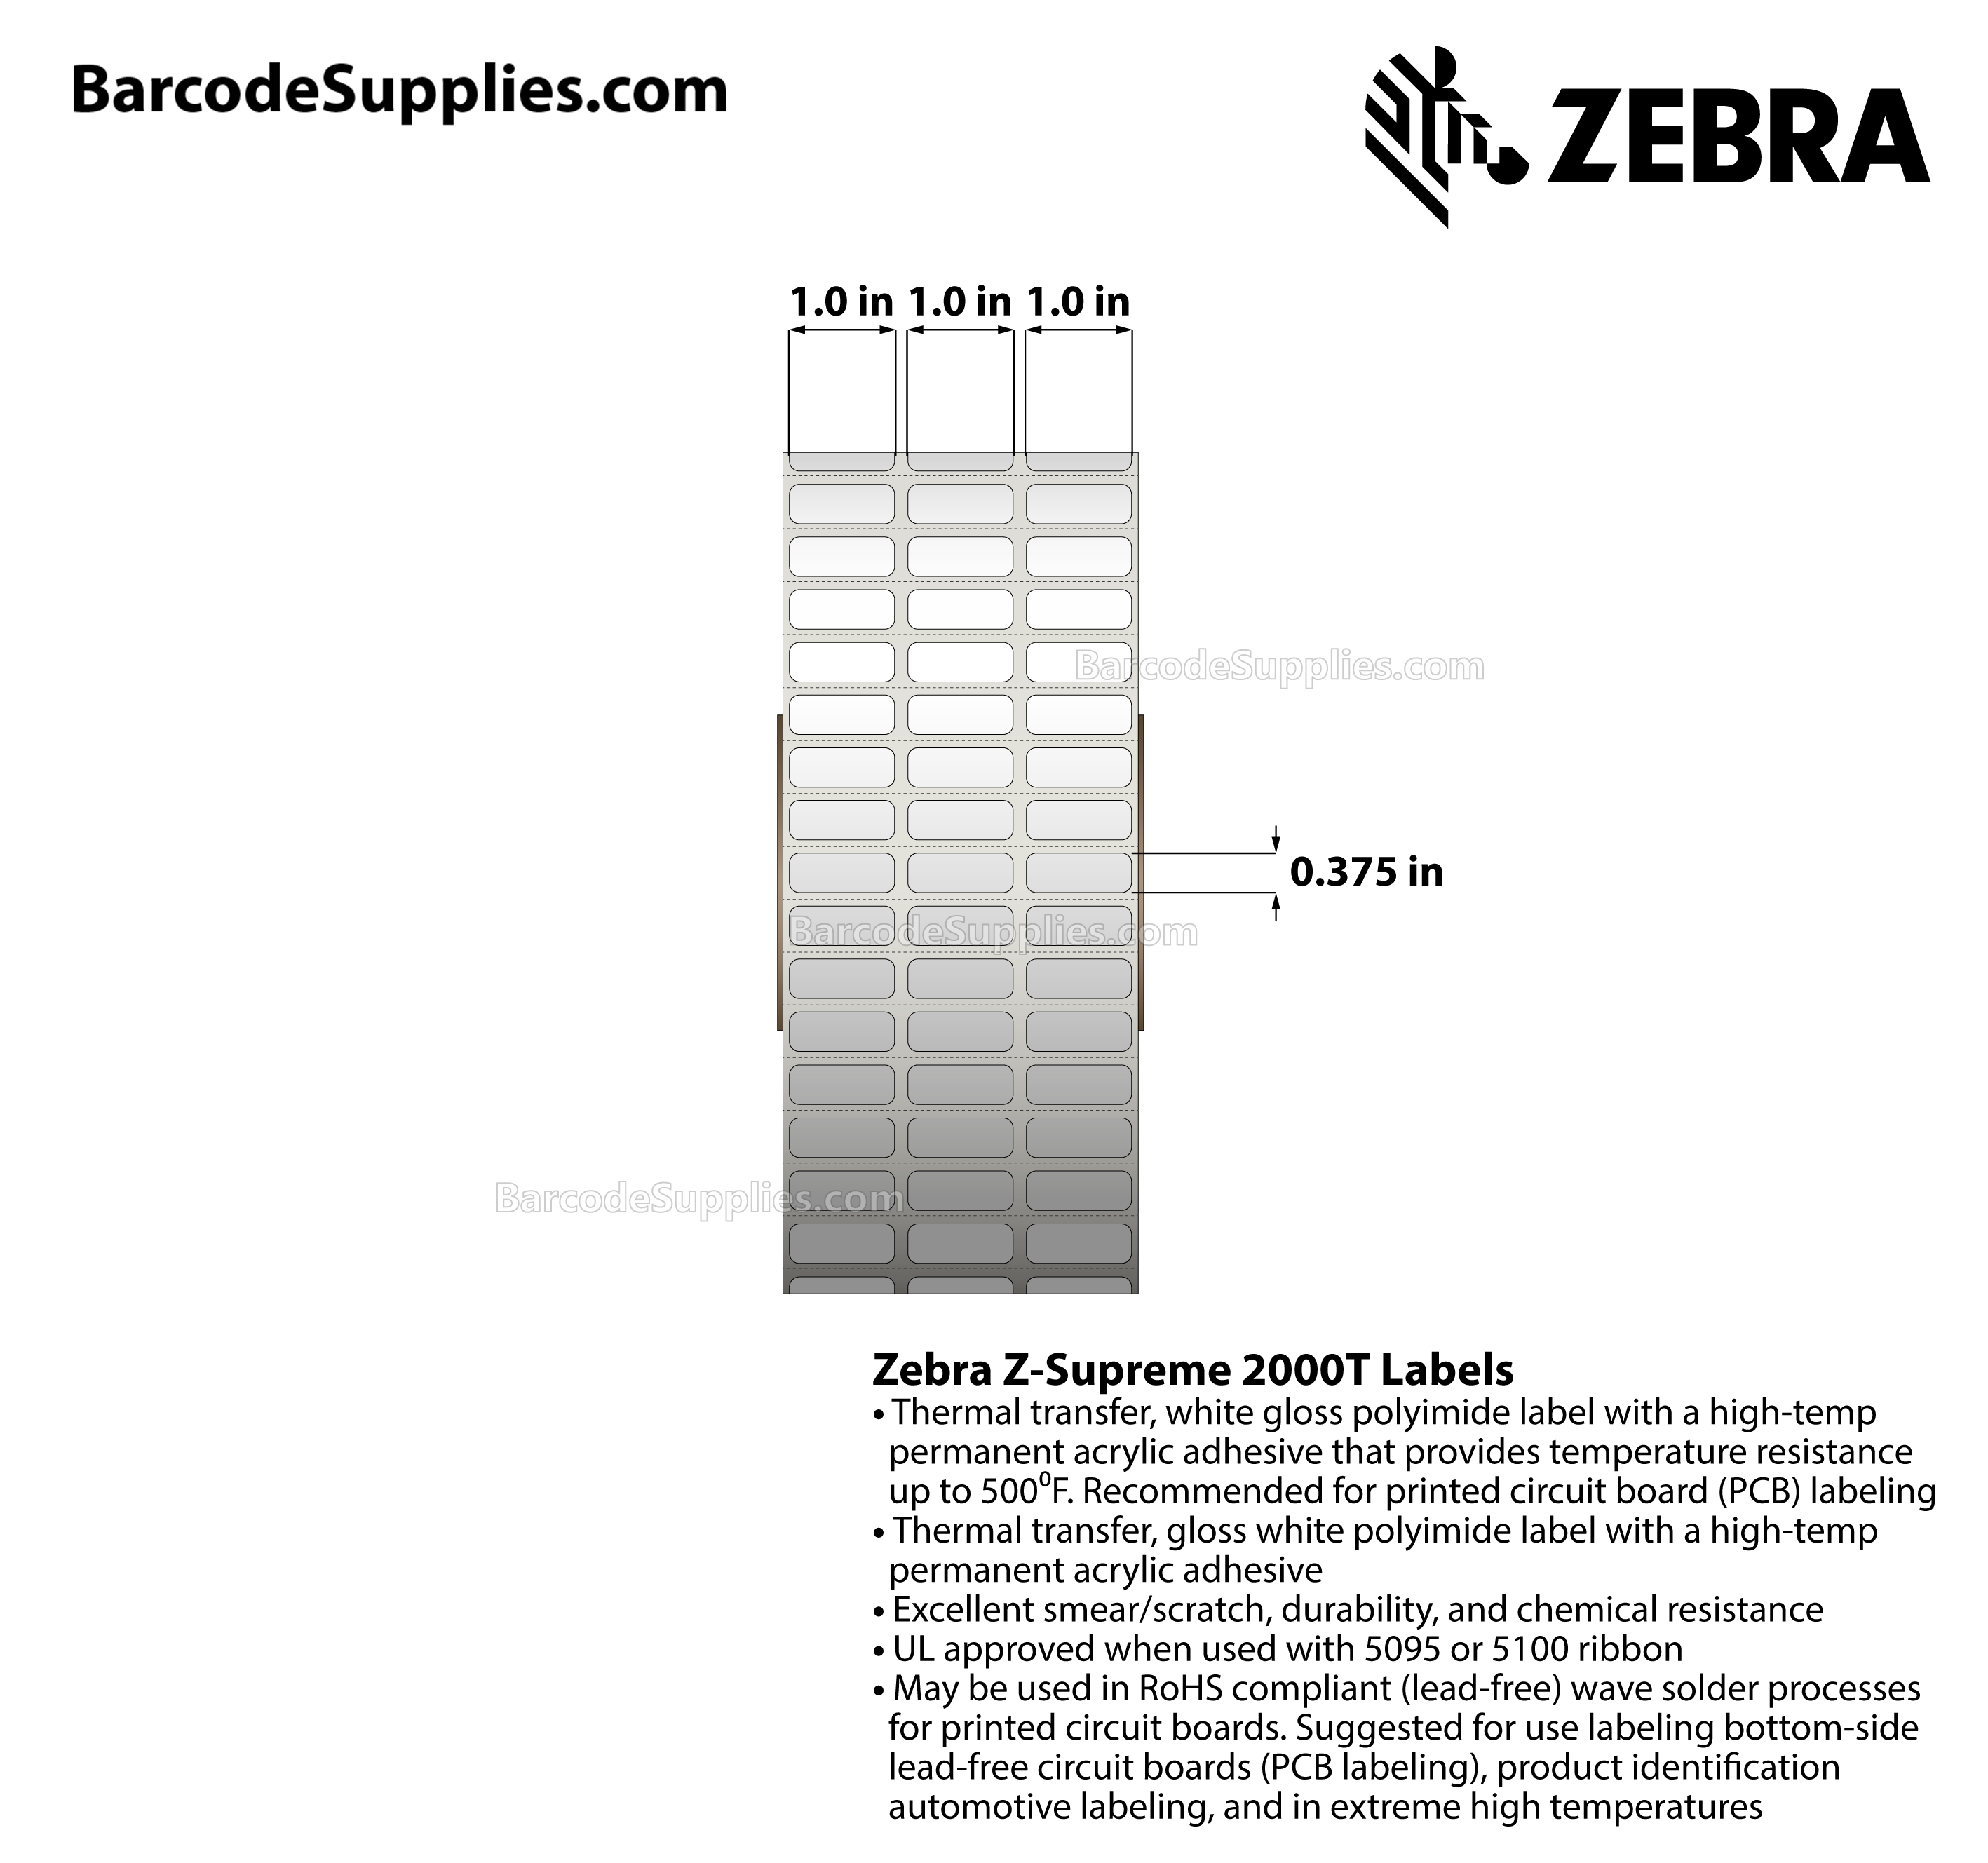 1 x 0.375 Thermal Transfer White Z-Supreme 2000T (3-Across) Labels With High-temp Adhesive - Perforated - 10002 Labels Per Roll - Carton Of 1 Rolls - 10002 Labels Total - MPN: 10023199